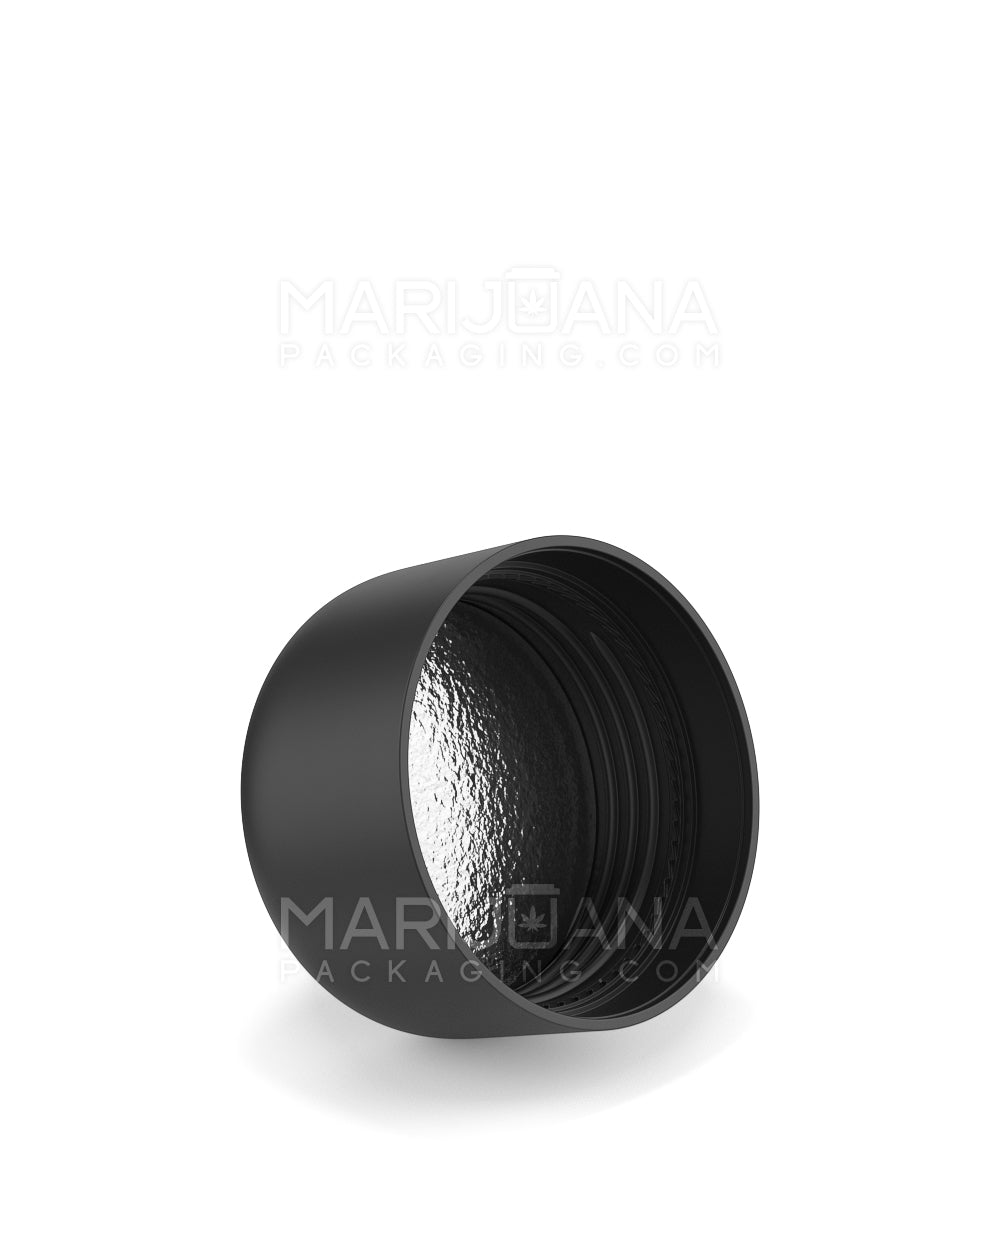 POLLEN GEAR | HiLine Child Resistant Smooth Push Down & Turn Plastic Dome Caps w/ 3-Layer Liner | 52mm - Matte Black - 72 Count